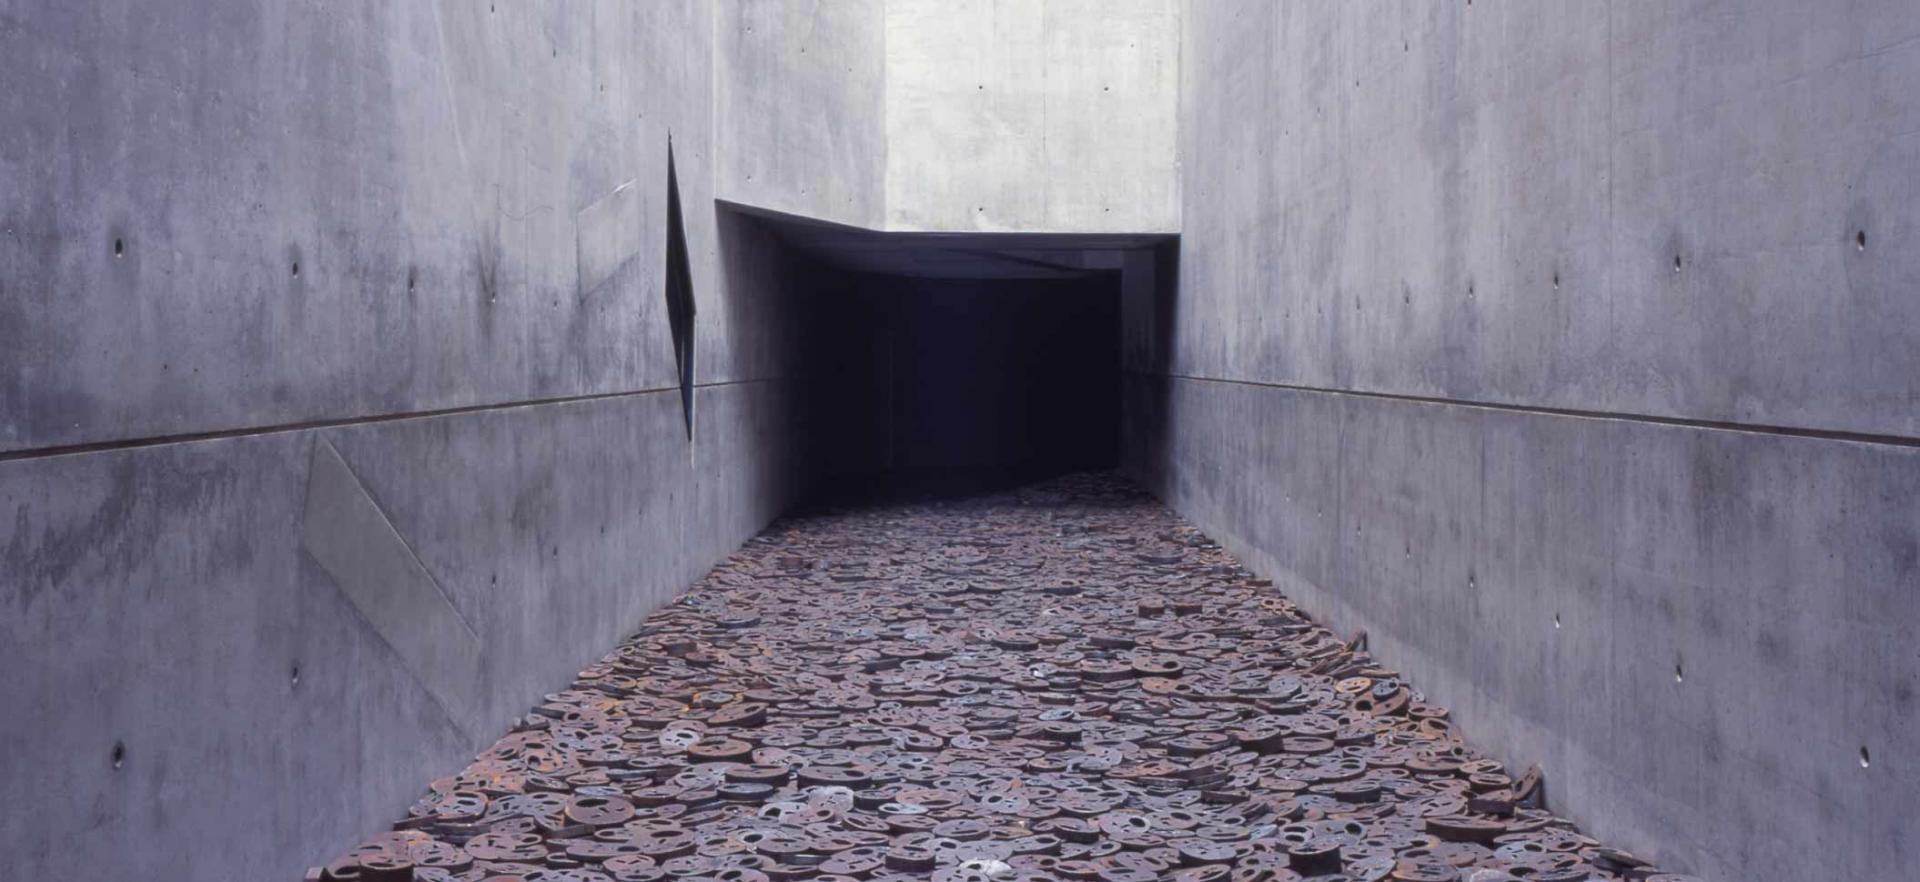 A corridor with bare concrete walls that gets lost in the dark. The floor is littered with thick metal discs into which faces with torn open mouths have been sawn.